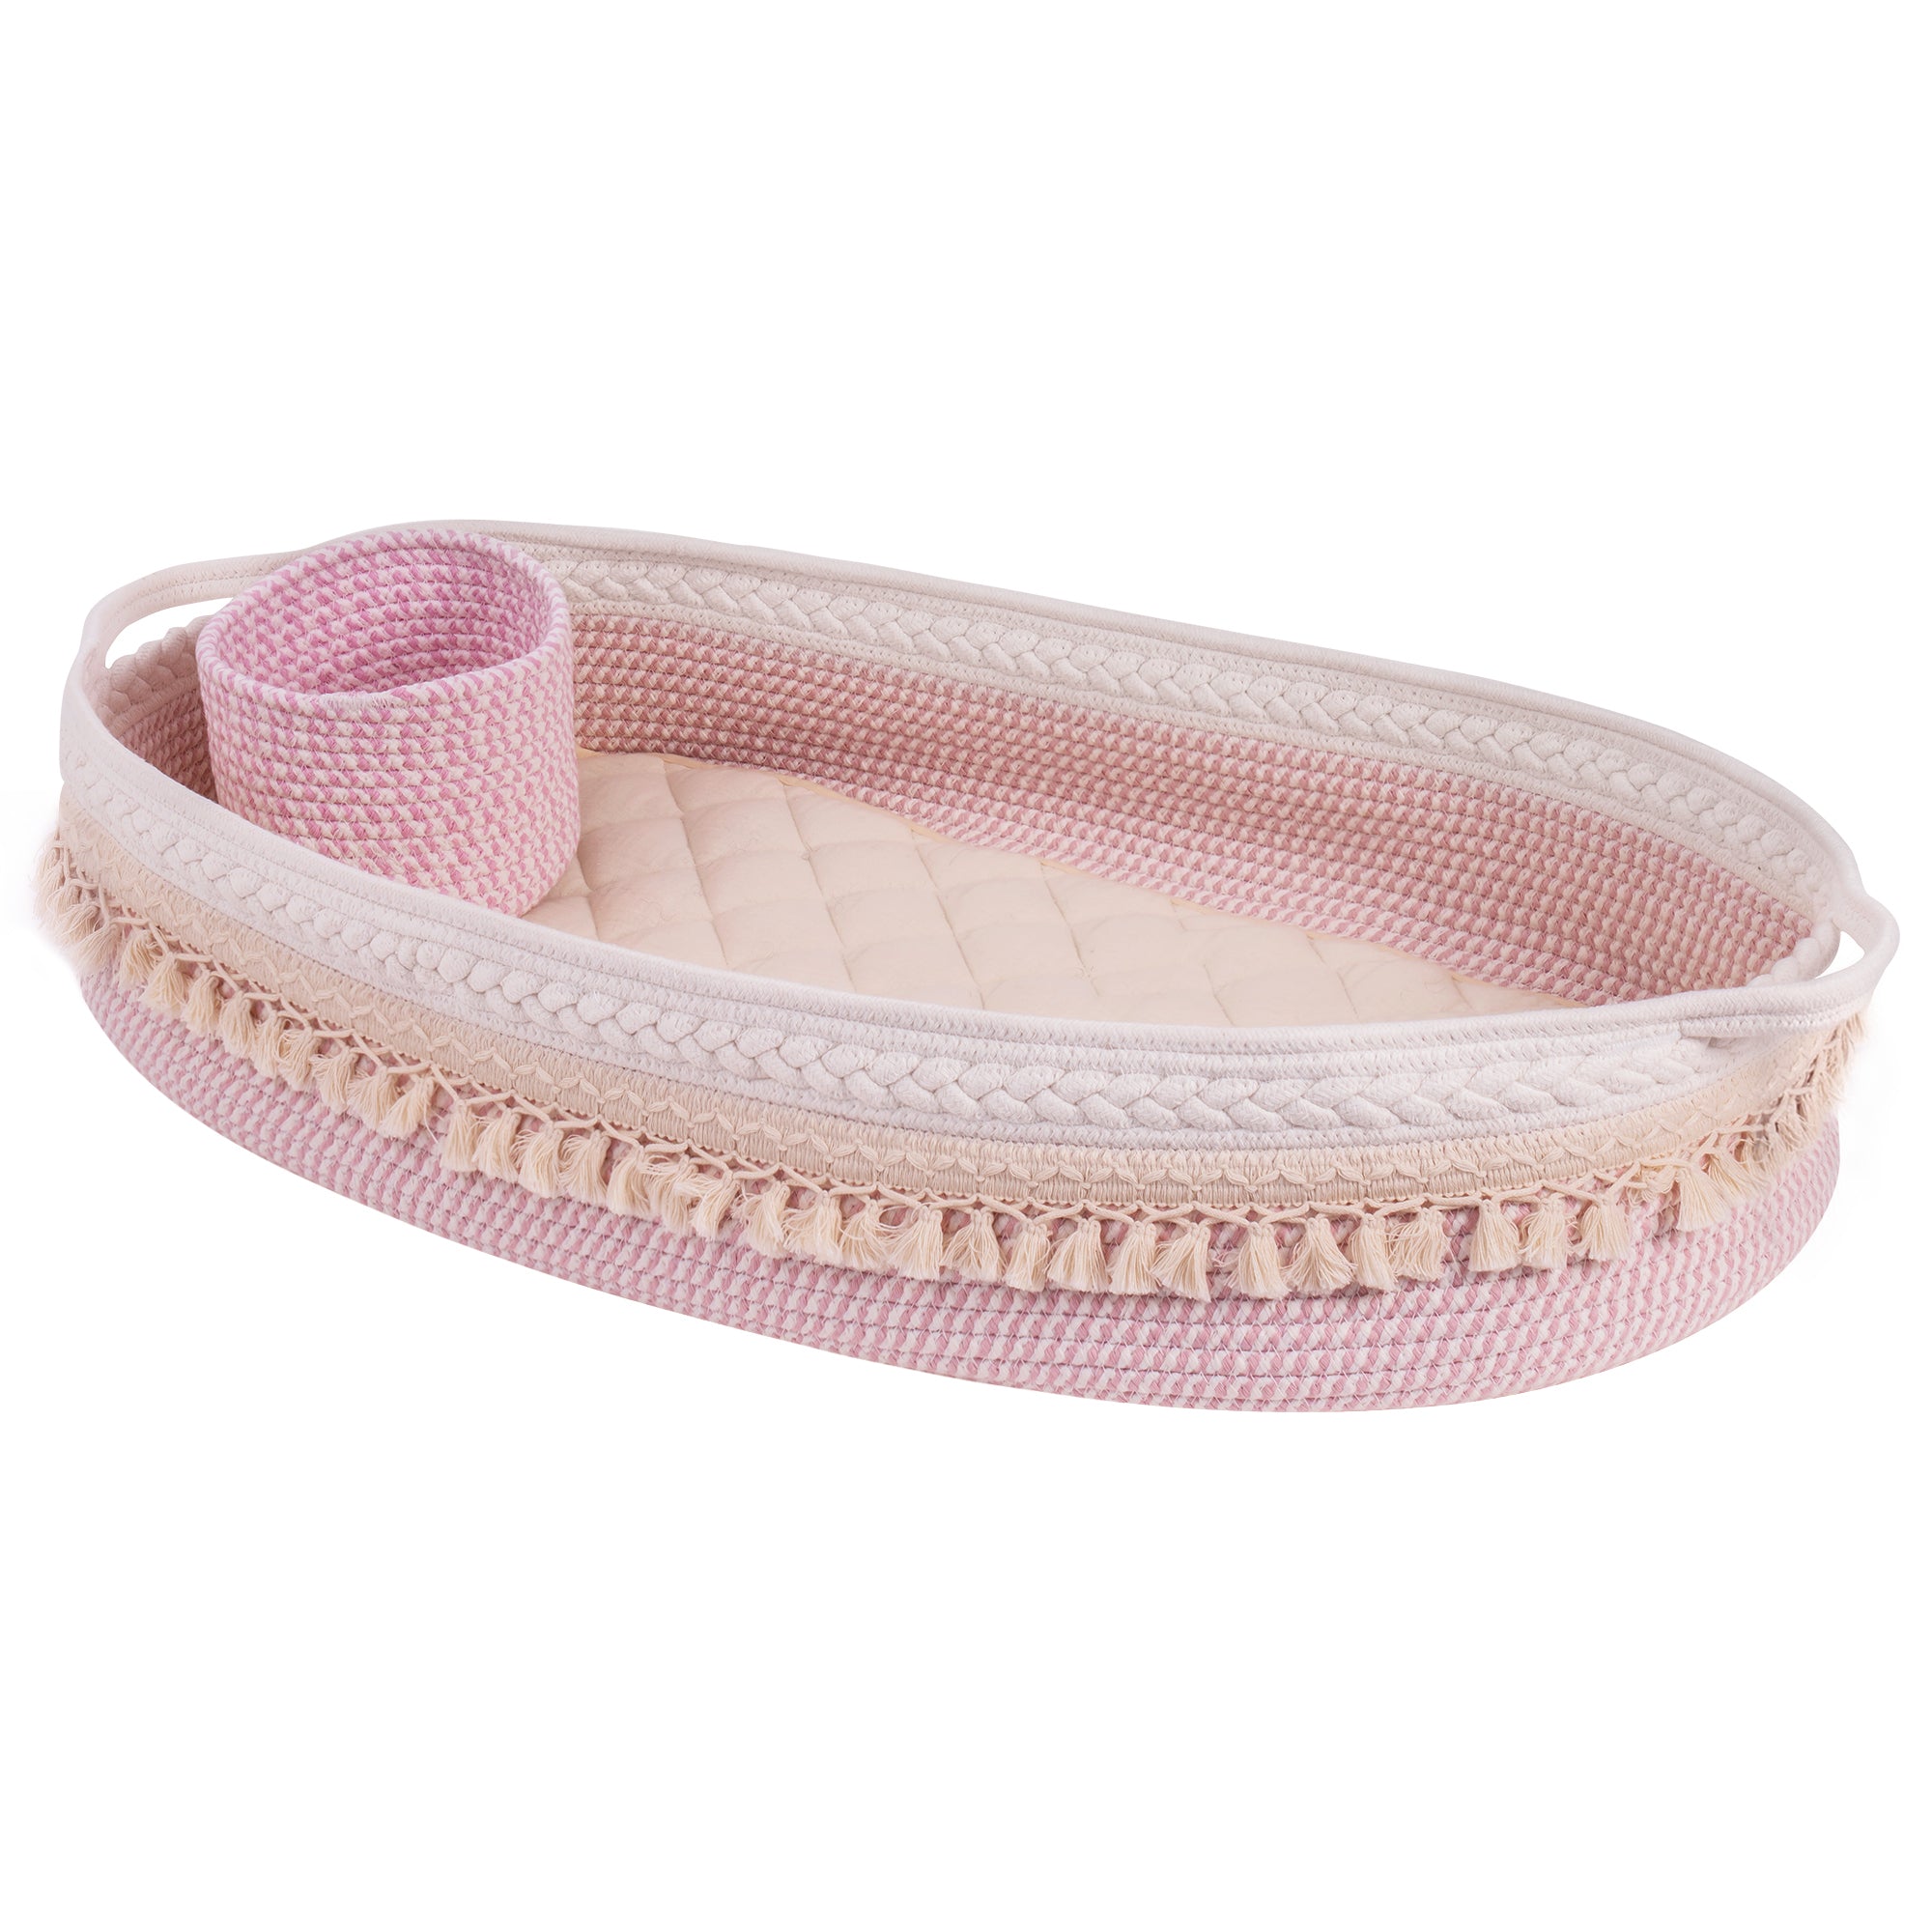 Baby Changing Handmade Woven Cotton Rope Moses Basket - Pink